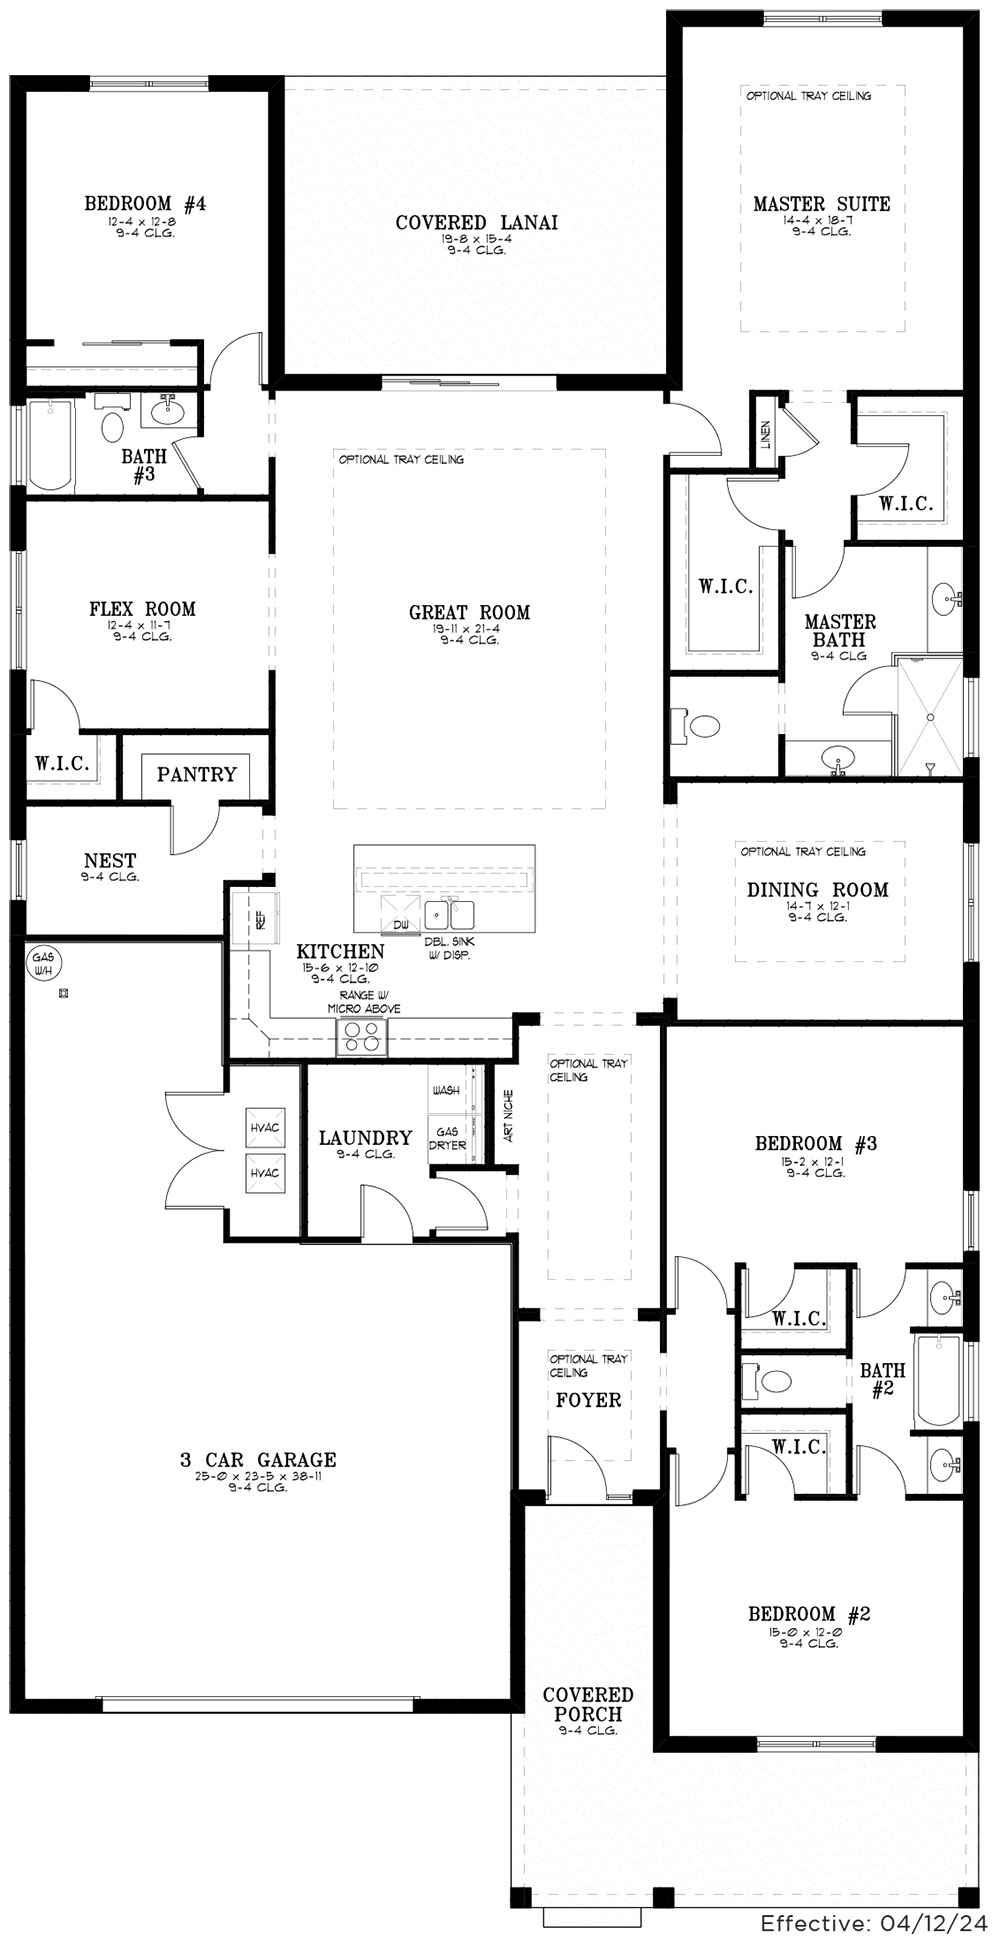 New Homes for Sale Ocala, FL at Calesa Township Larkspur New Home Floor Plans